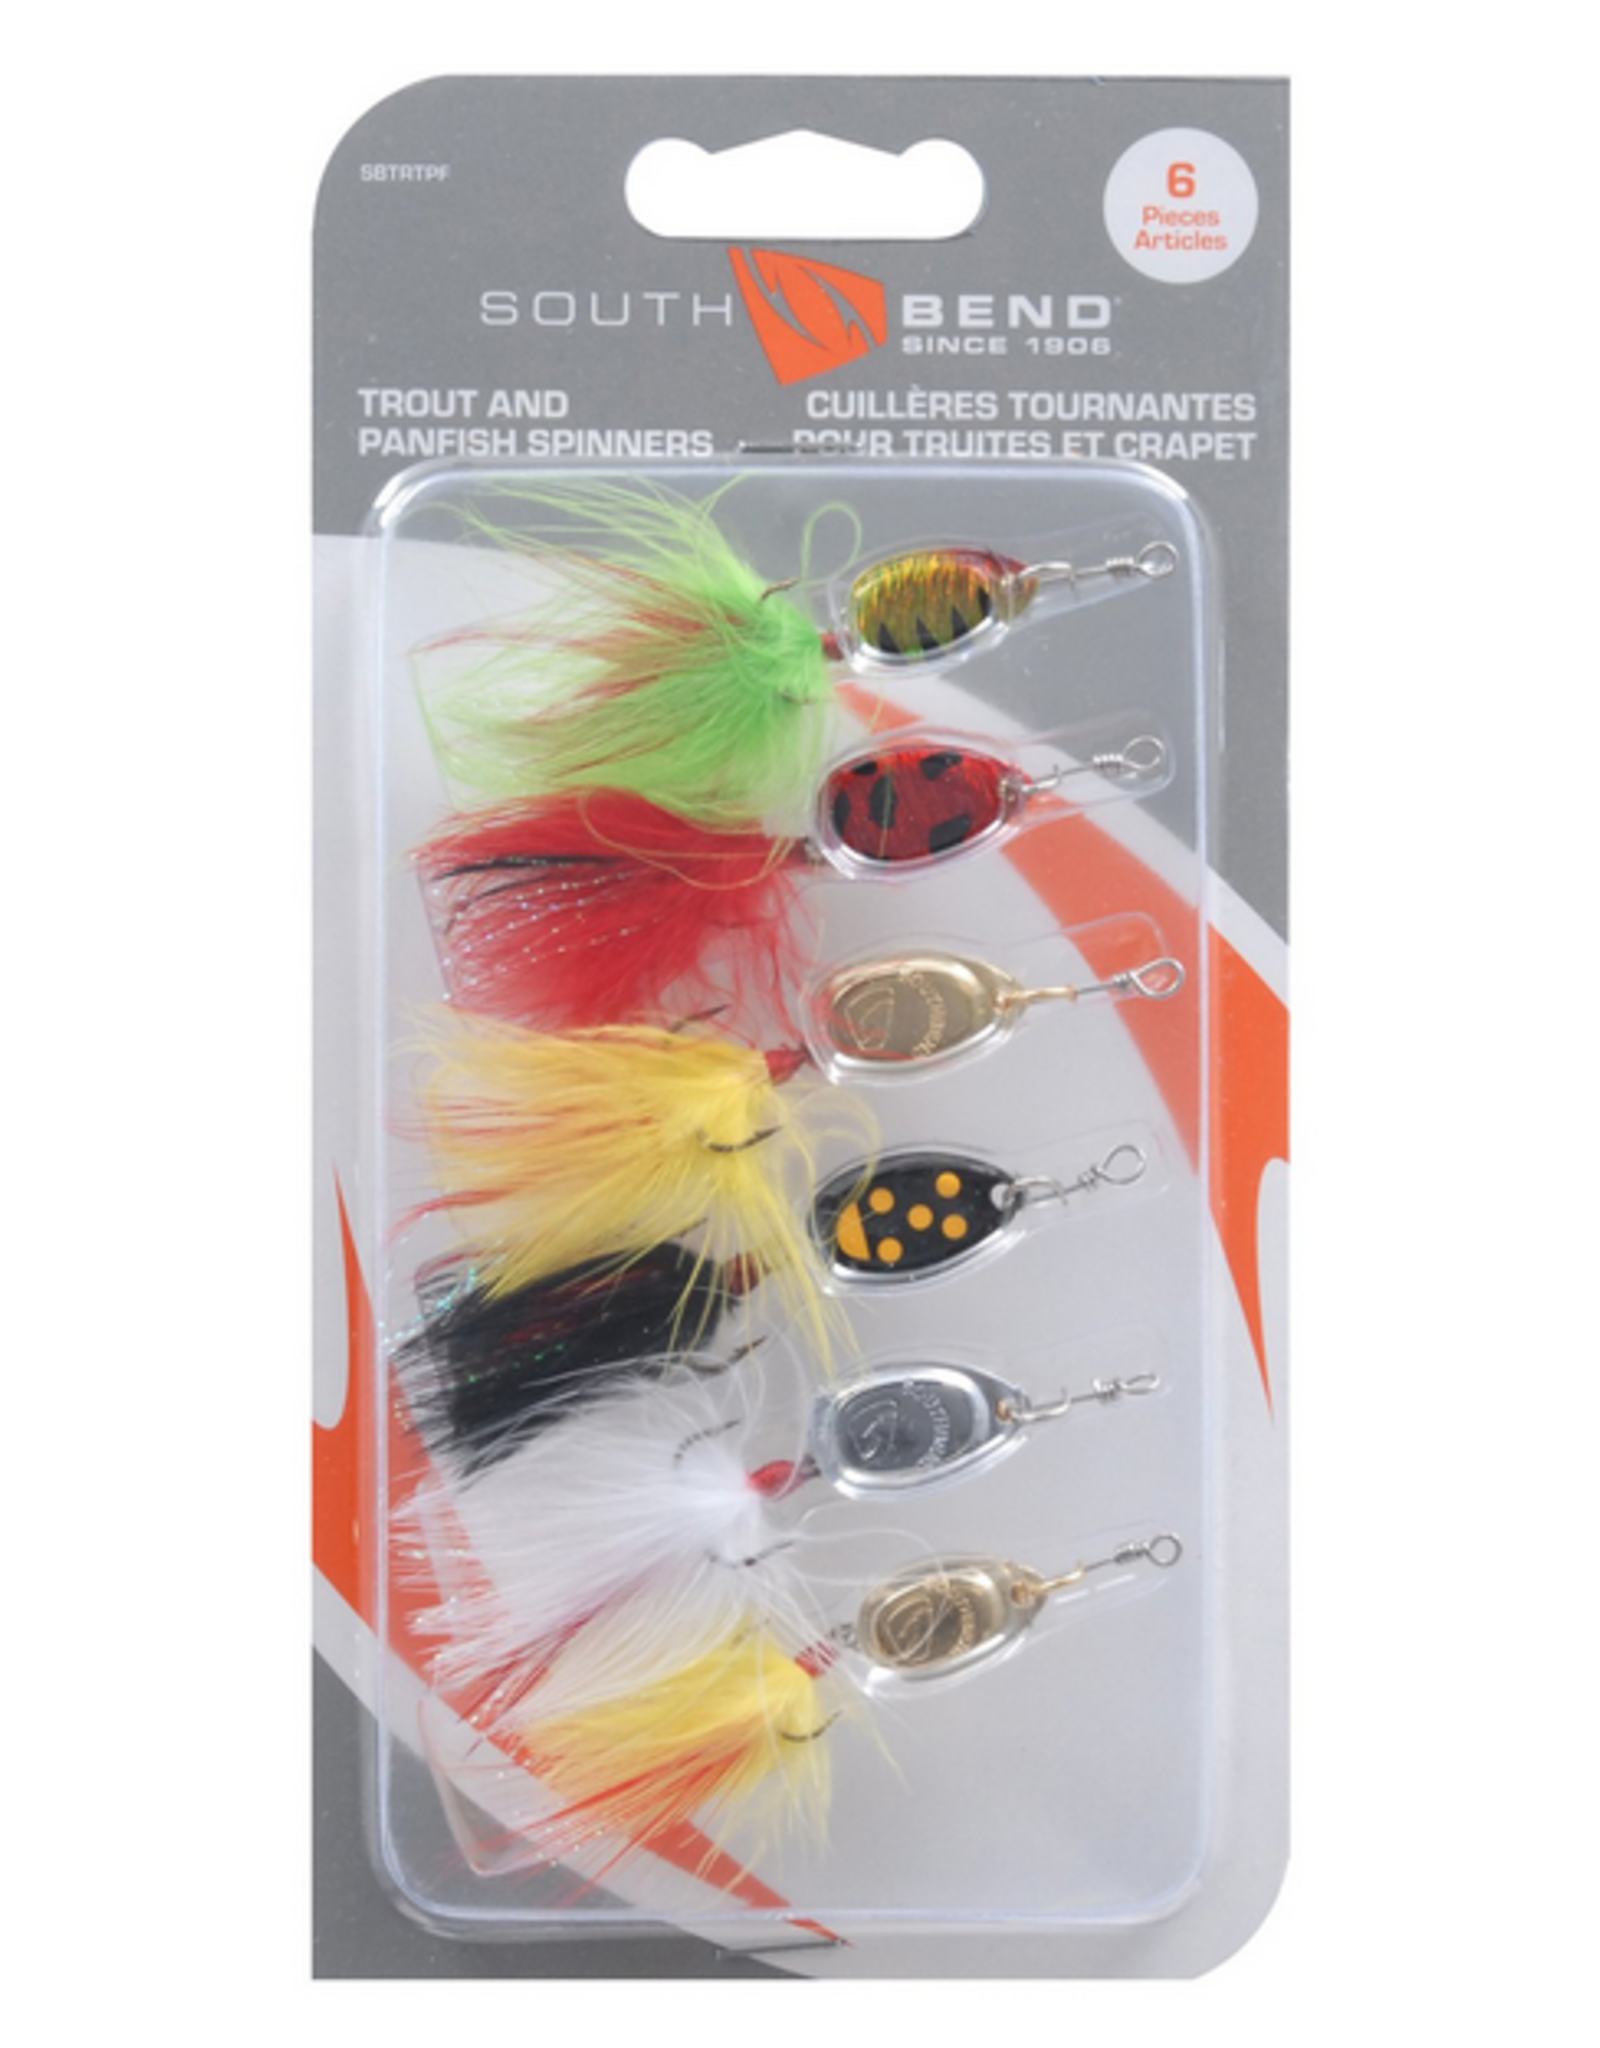 South Bend Trout and Panfish Spinner Assortment